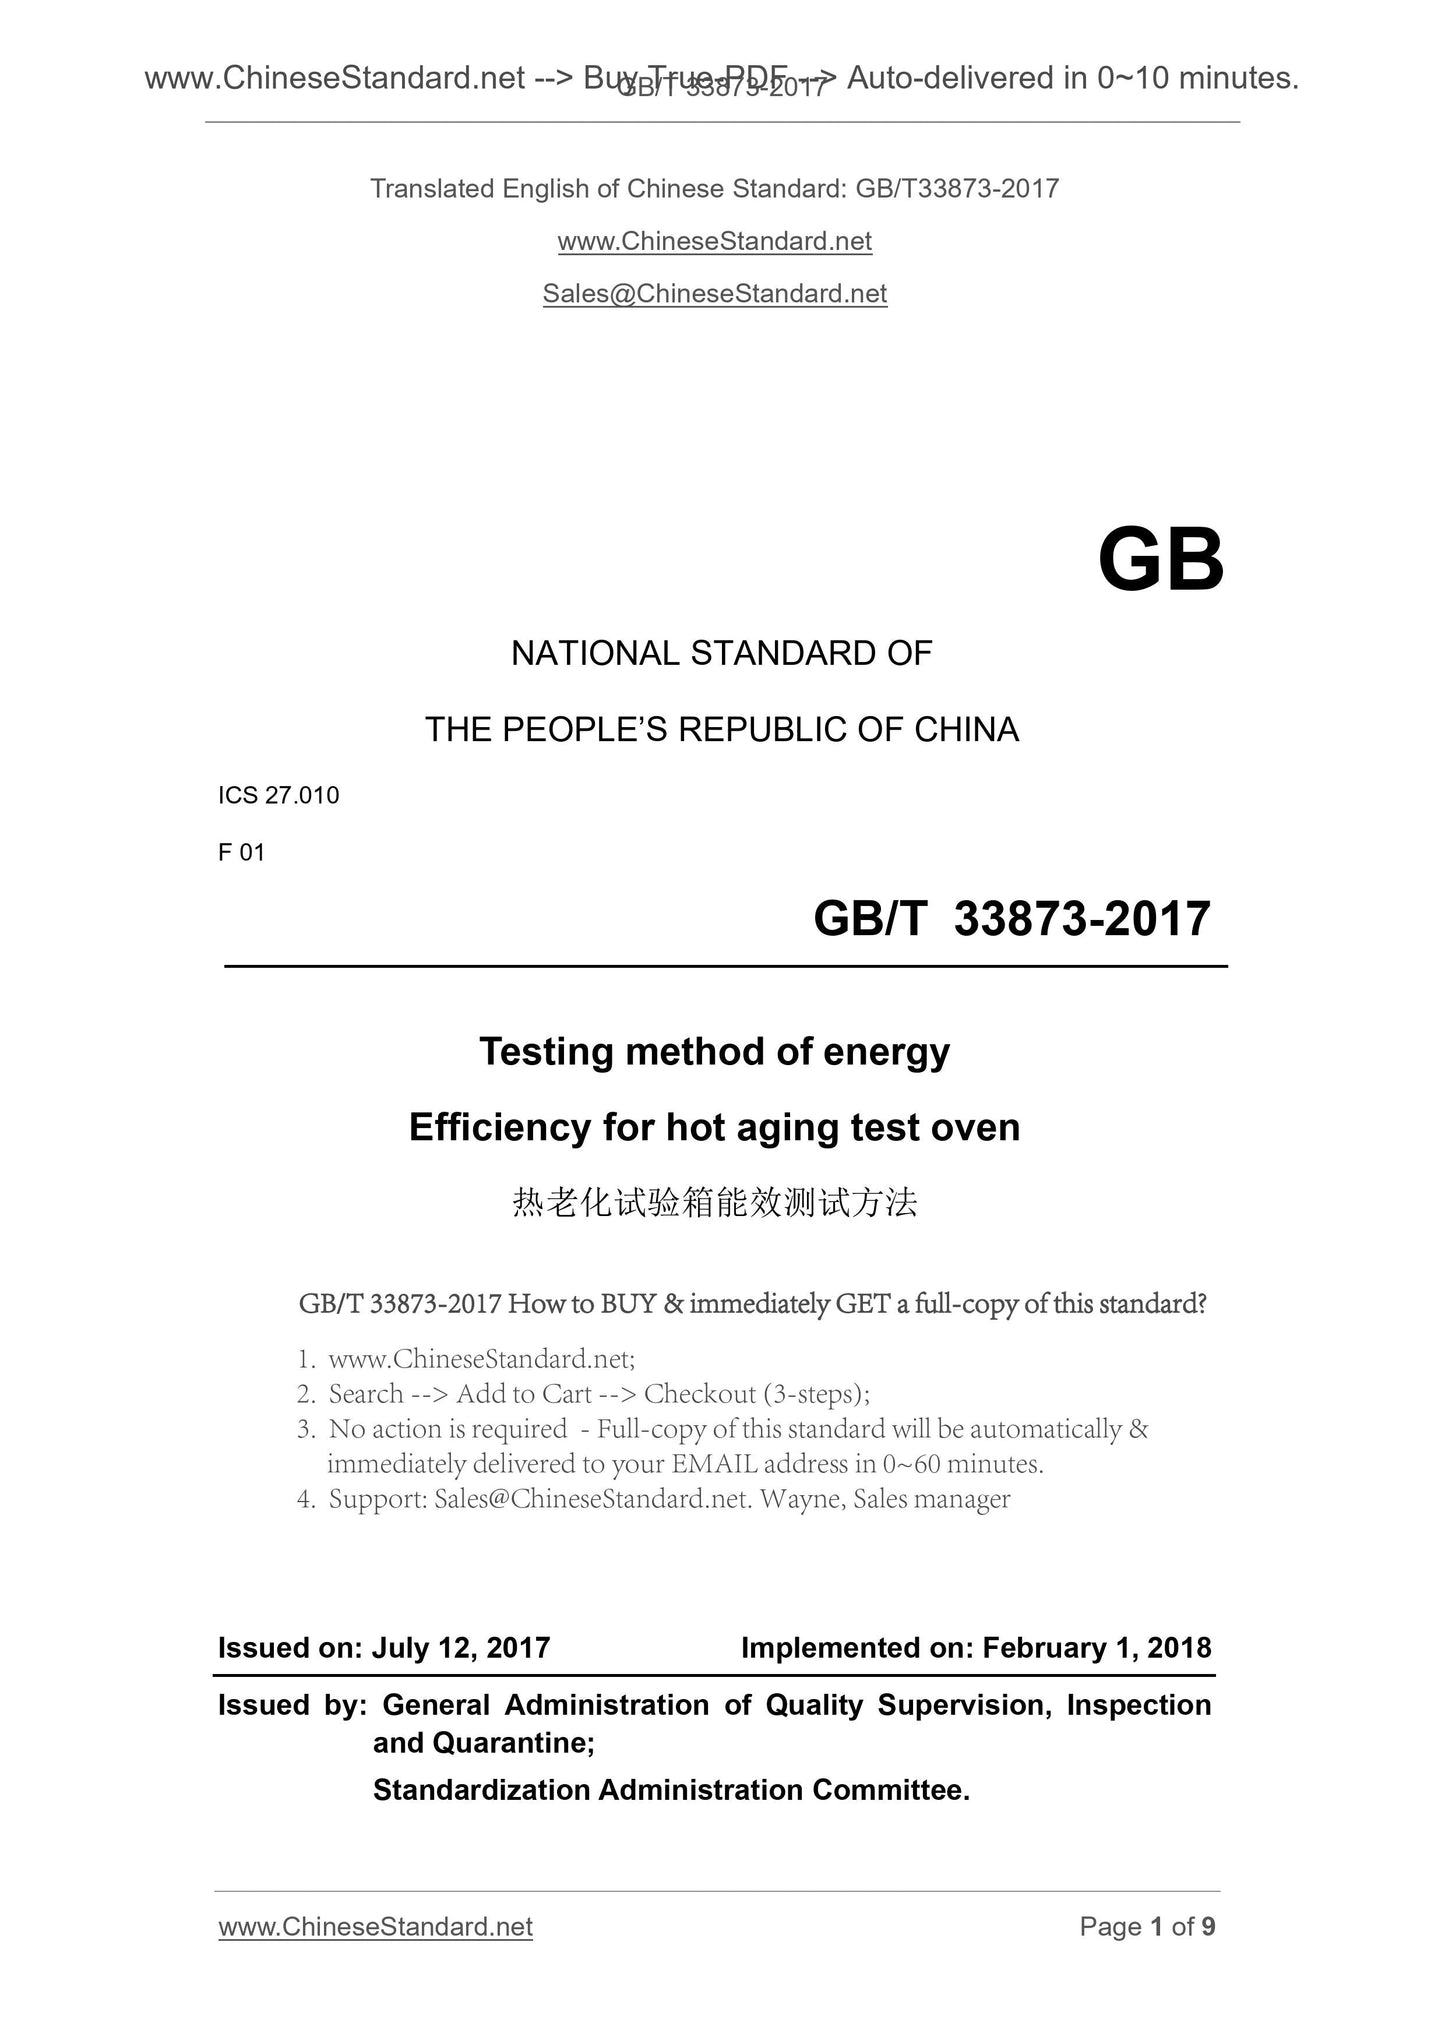 GB/T 33873-2017 Page 1